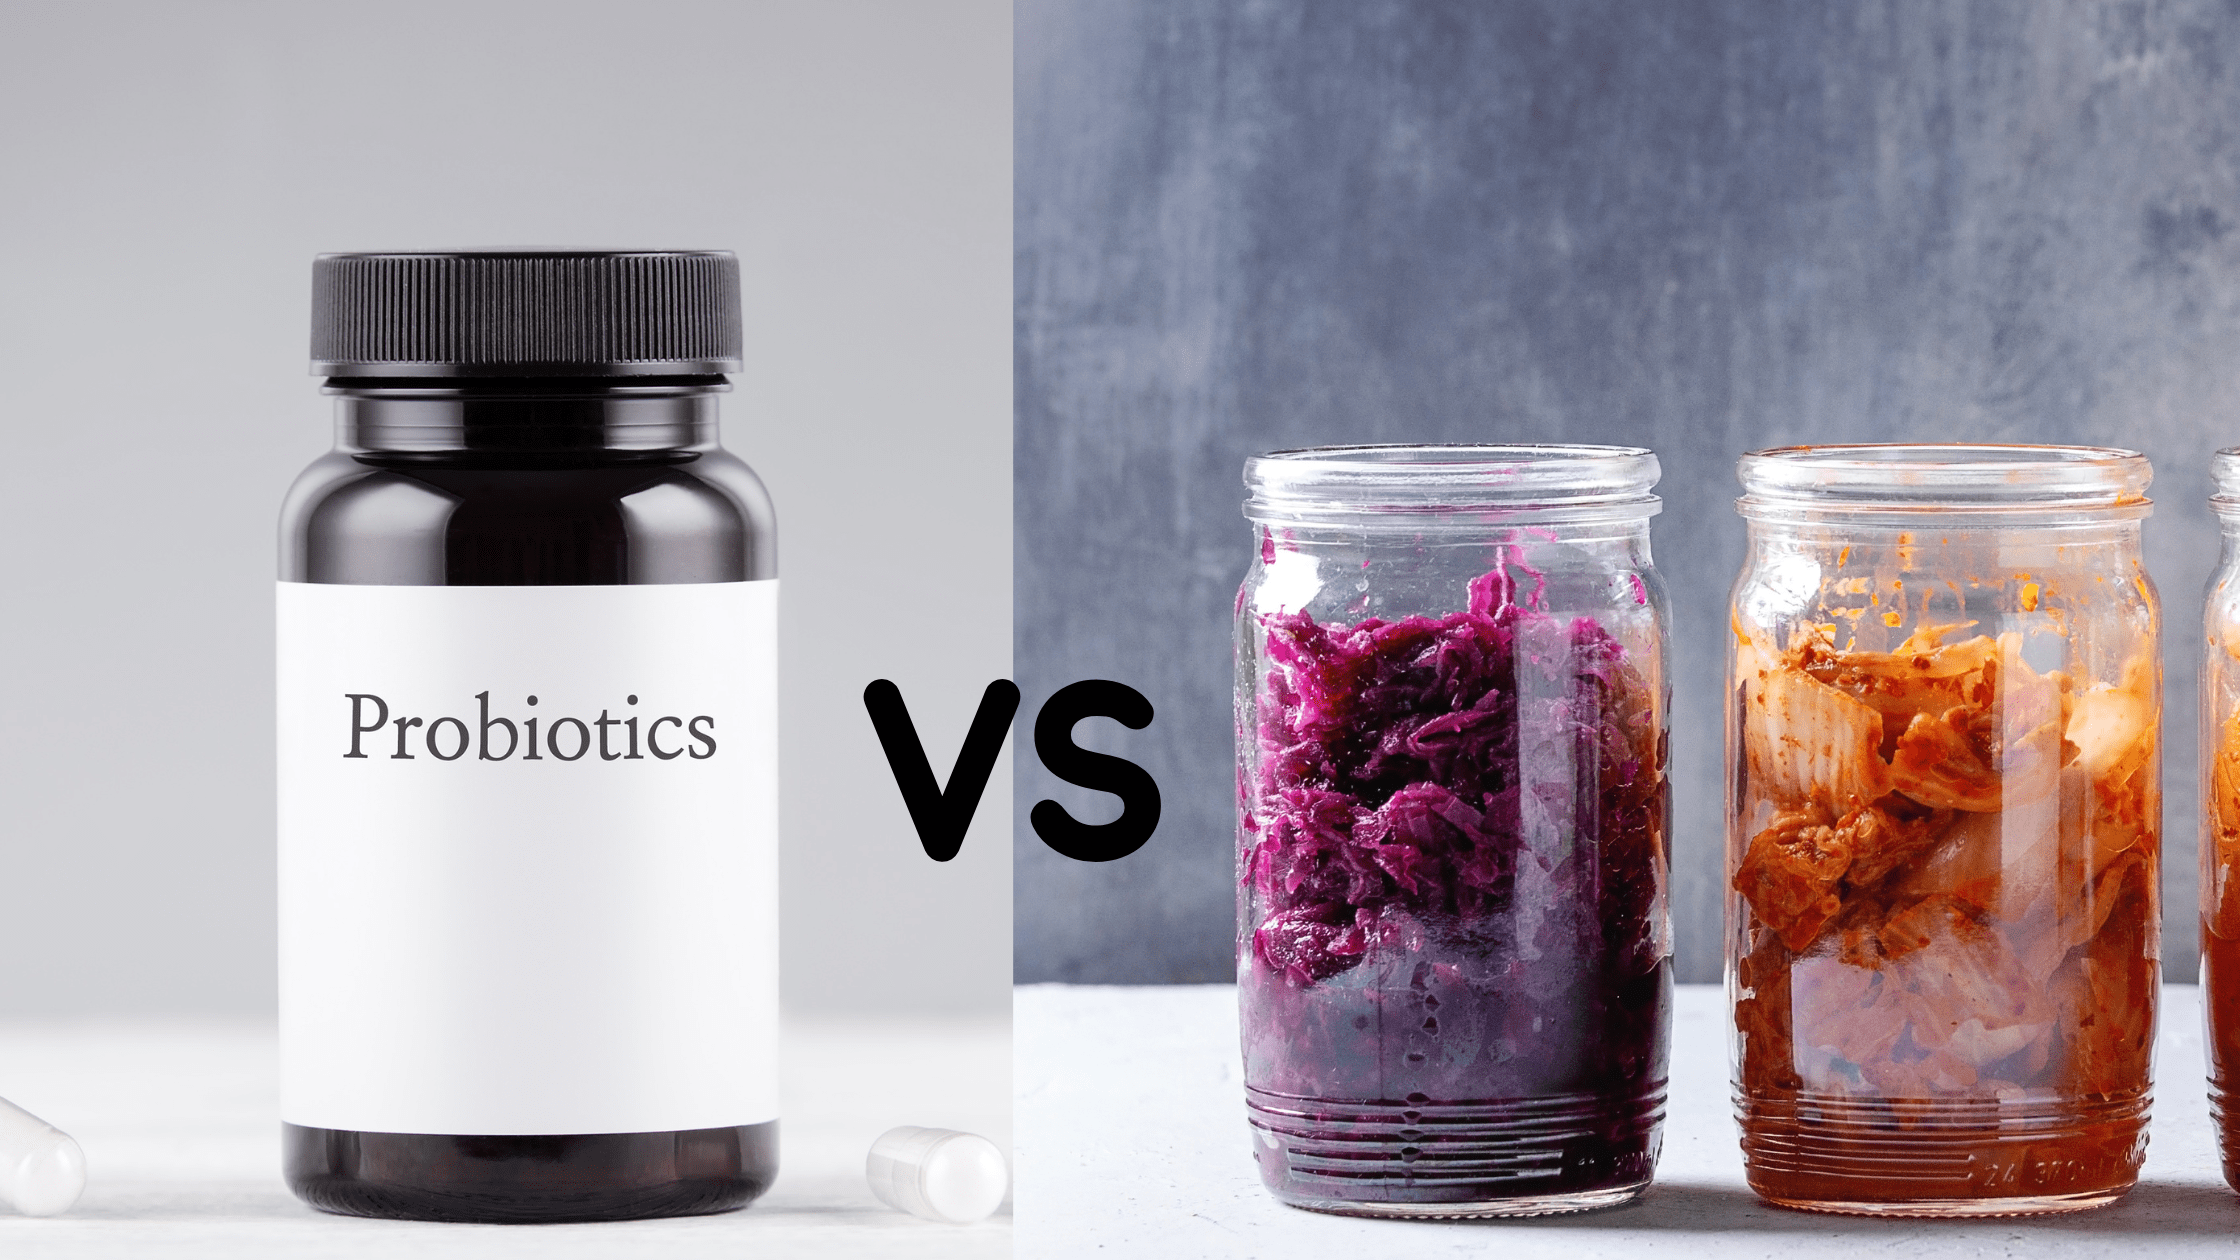 A medicine bottle of probiotics posed next to glass jars of fermented foods.